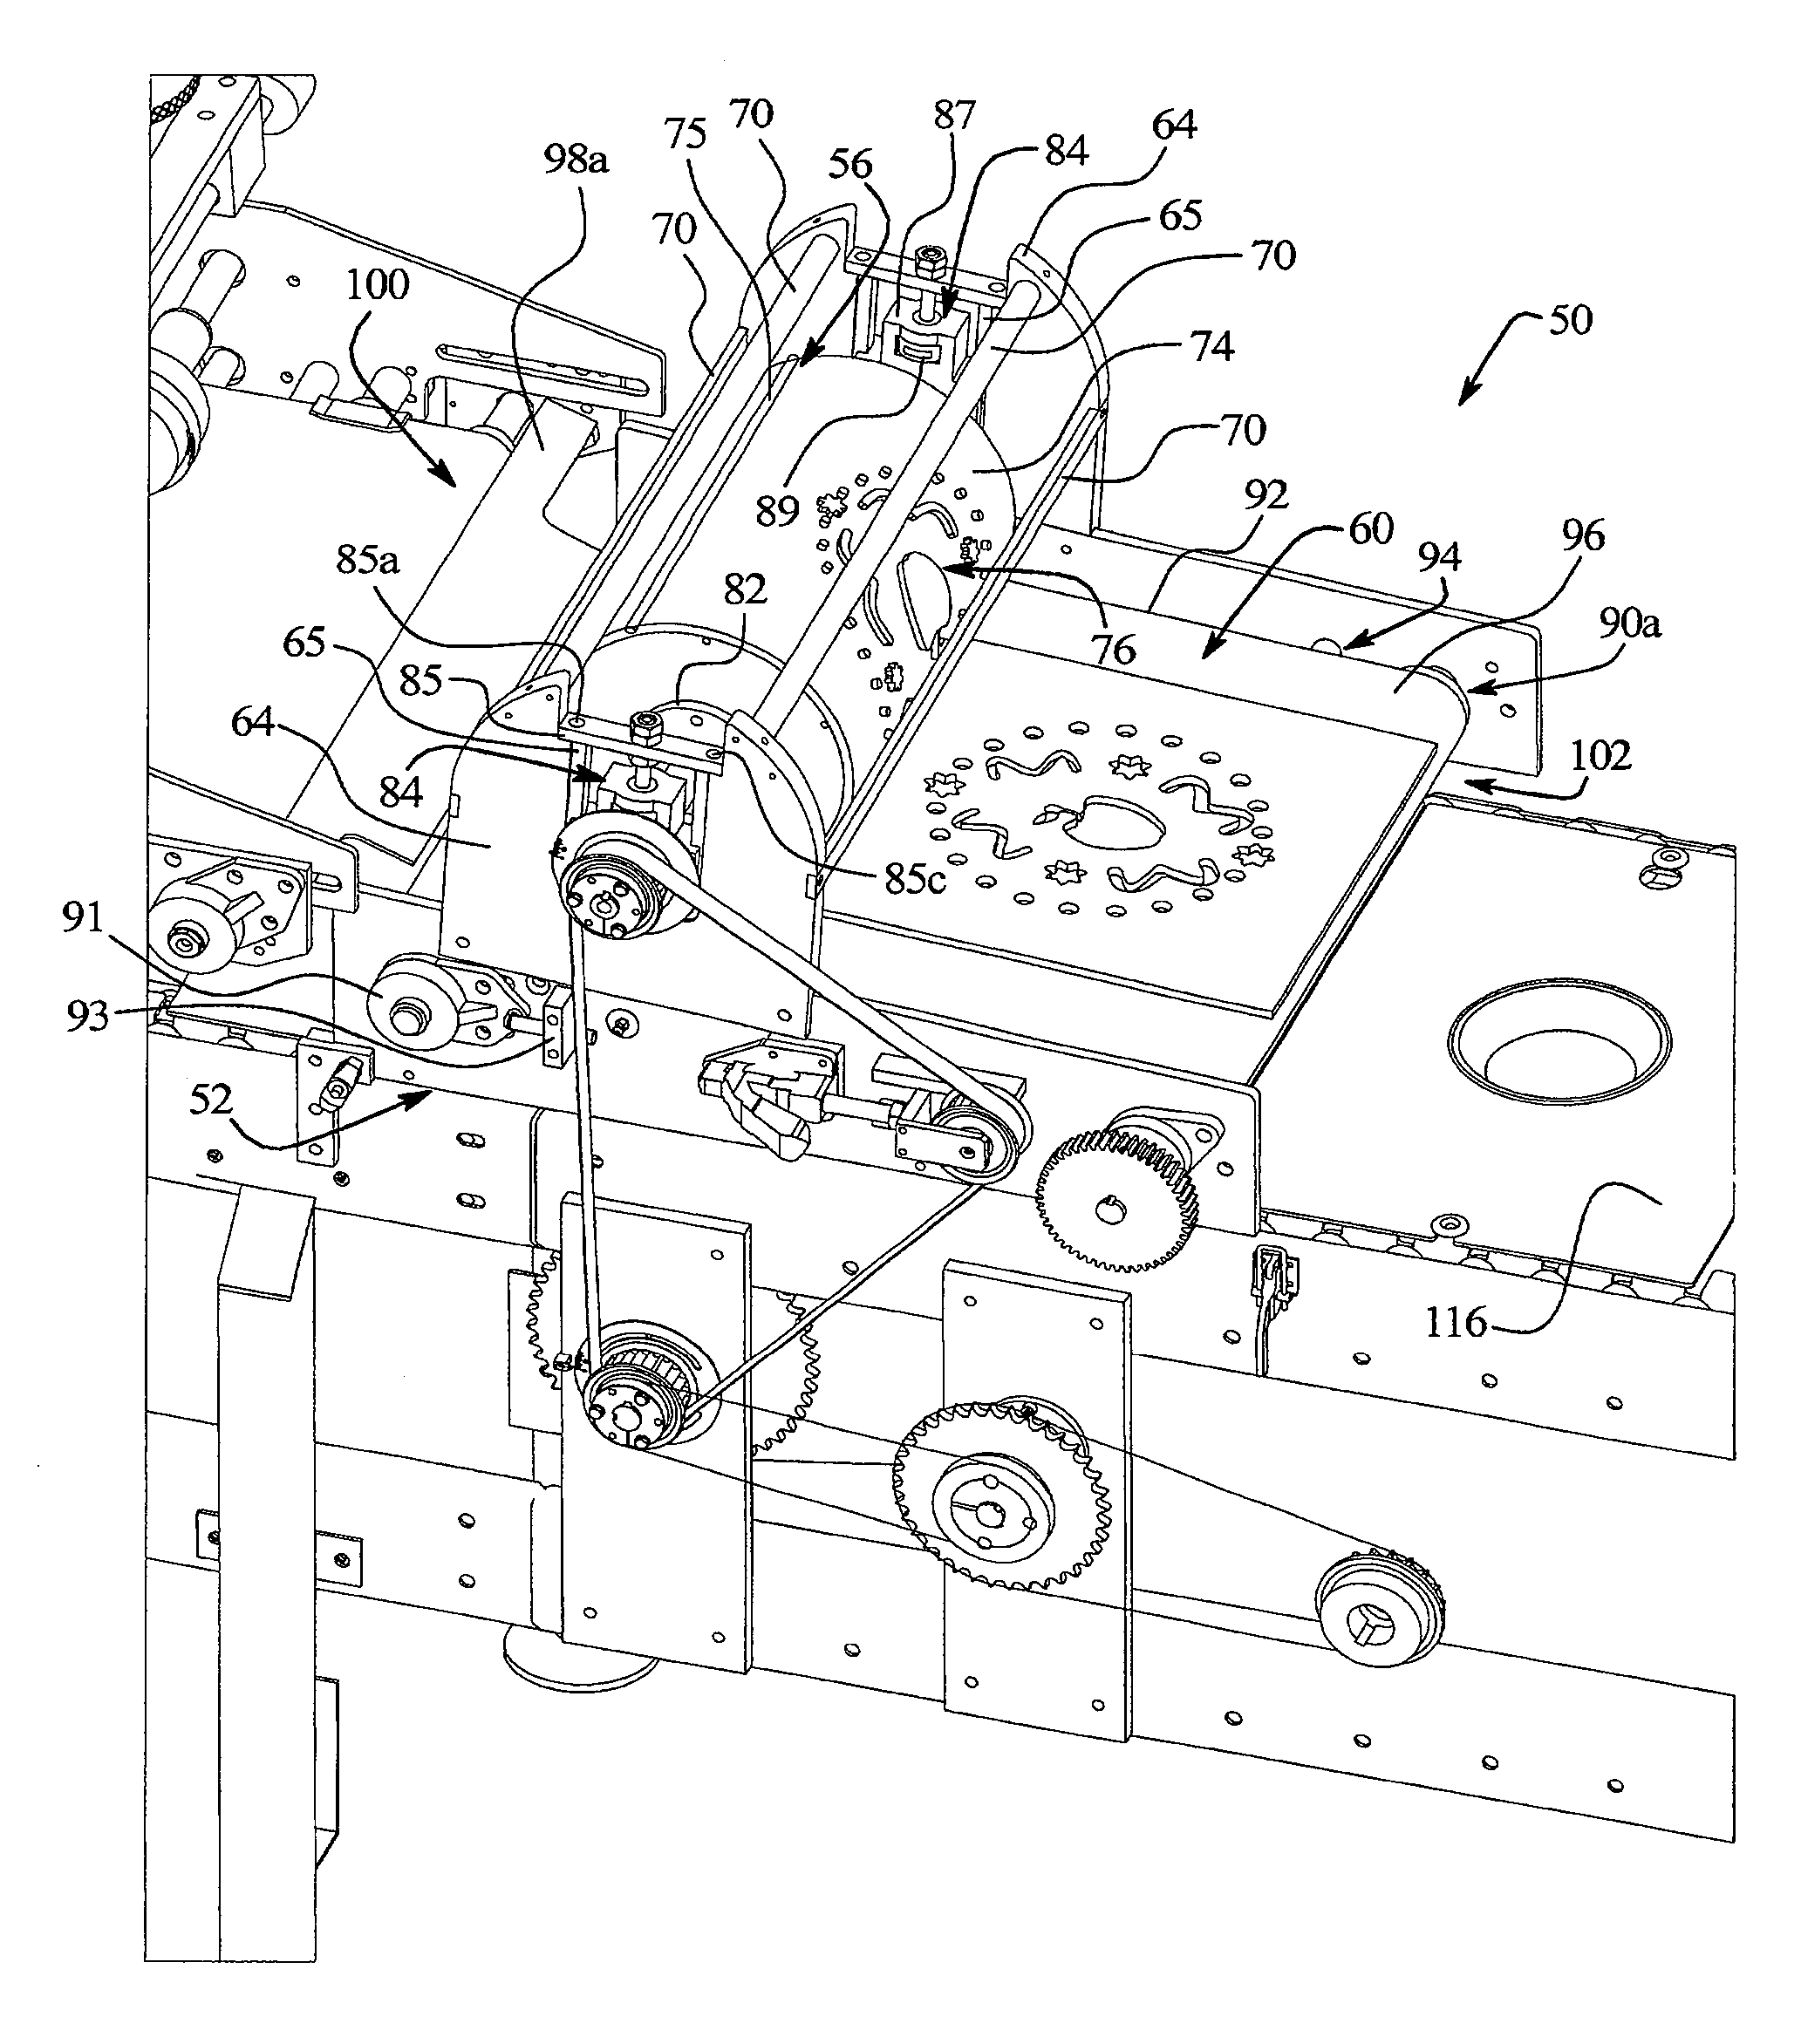 Pie top forming apparatus and method